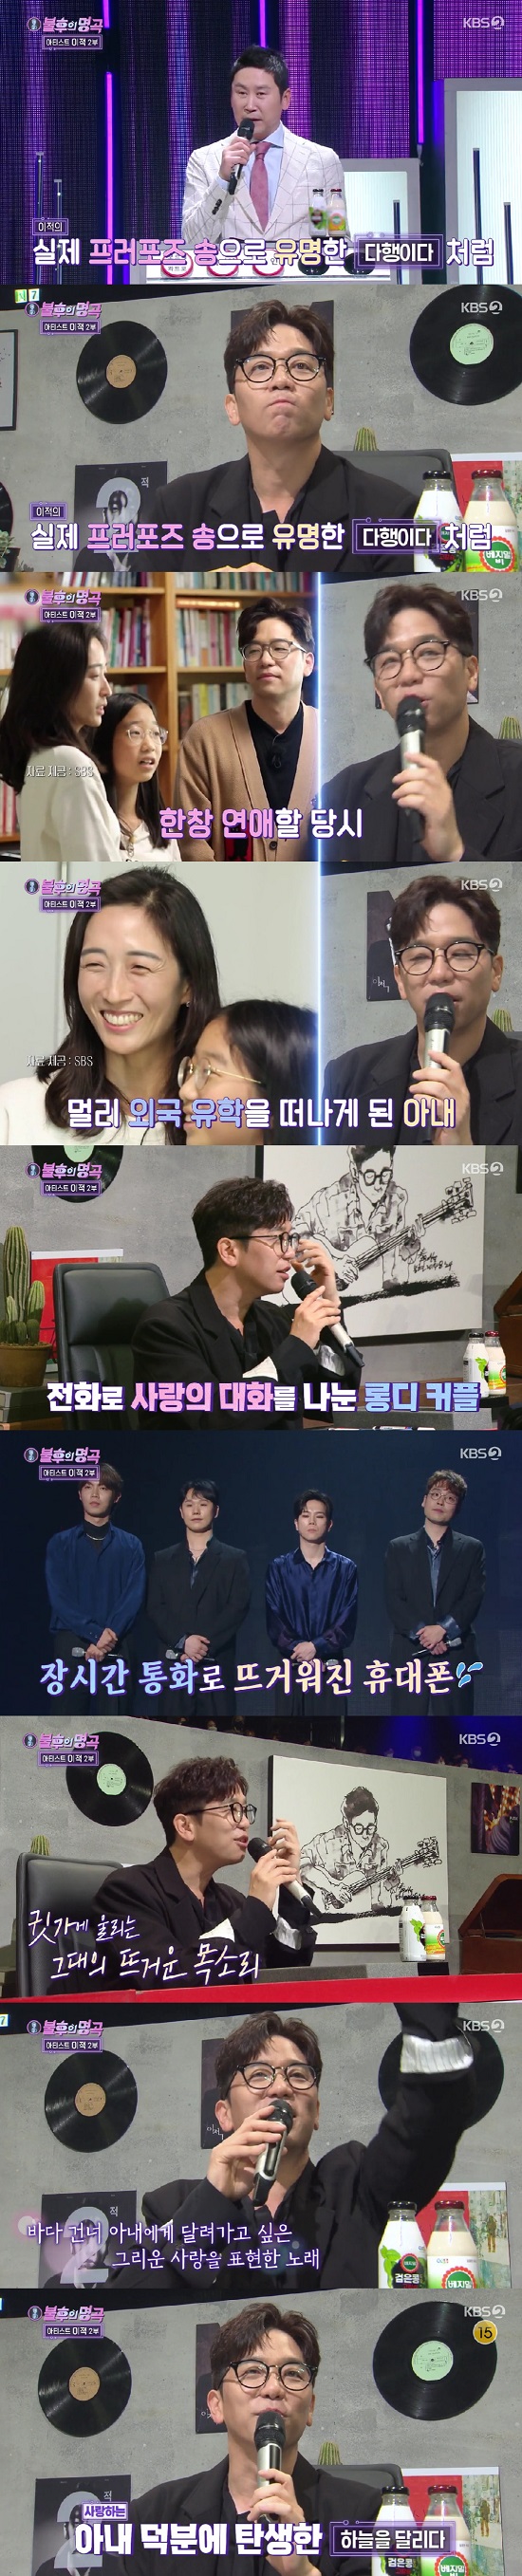 KBS 2TV Immortal Songs: Singing the Legend, which was broadcast on the 18th, was decorated with two parts of Artist Lee Juck.On the day of the broadcast, Shin Dong-yeop mentioned Lee Jucks Good luck song and said, I know that this song is a song made for my wife on the wedding day.Lee Juck said, This song will not sound like a love song, but when I am dating my wife, I have to go abroad to study and have a lot of work to call.My cell phone has become hot due to long calls, he said, referring to the lyrics of Your hot voice in your ears.Revealing the behind-the-scenes of the song Run Sky, Lee Juck said: I want to fly now, run Sky.It is a song made with exciting Feelings while putting the heart. Lee Jucks Of course Things stage was shown, and Lee Juck said, Dongha is a rocker.It is a vocal that does not shake even if I sing a song that is so loud and so high in that tone. I also heard it with new Feelings Lee Juck also told the behind-the-scenes song work with Lim Young-woong.Im going to write (Lim Young-woongs) song, and Im just grateful for saving a lot because its the title song, Lee Juck said.Hero is very good at singing, and he is sincere, he praised him.The final win of the day was won by Kang Seung-yoon; he defeated Choi Jung-in, who had won two.Lee Juck looked at the stage of his juniors singing his songs and said, I want to enjoy such a luxury. I do not know what to do.Photo: KBS 2TV broadcast screen